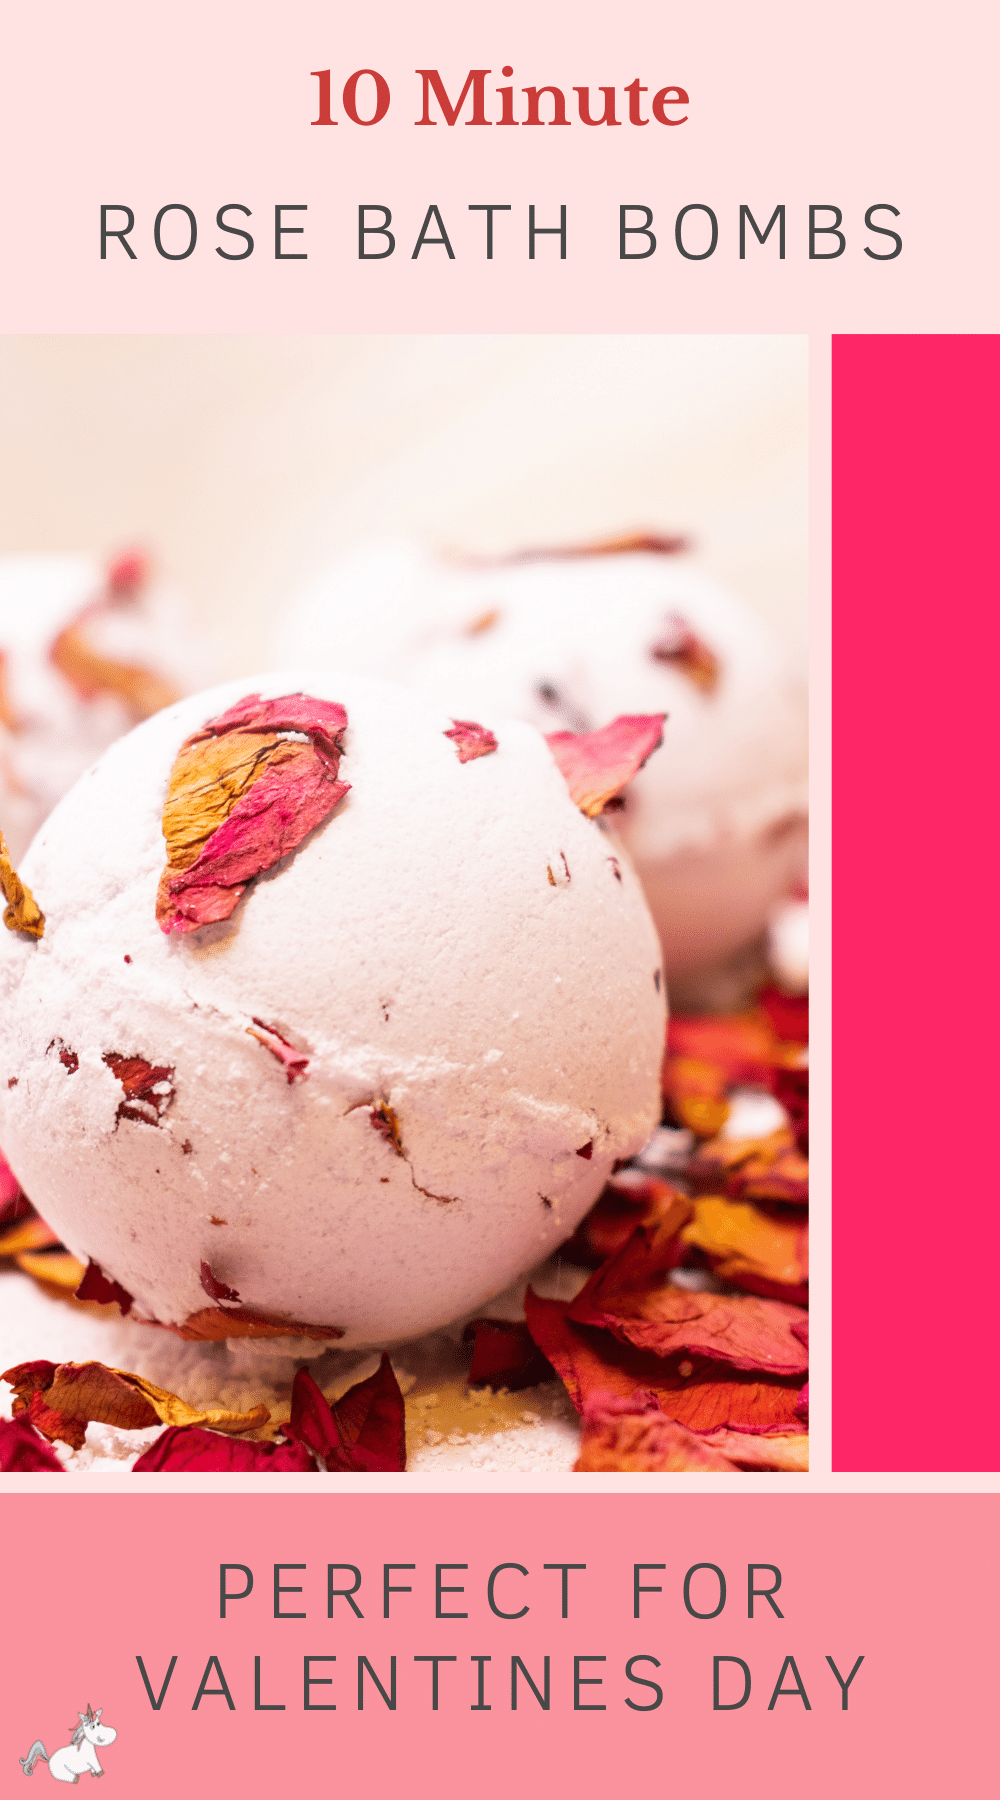 How To Make Rose Bath Bombs In Just 10 Minutes! These rose bath bombs are perfect for Valentine's day! Filled with dried rose petals and scented with rose essential oil, this bath bomb recipe will give you a real treat!